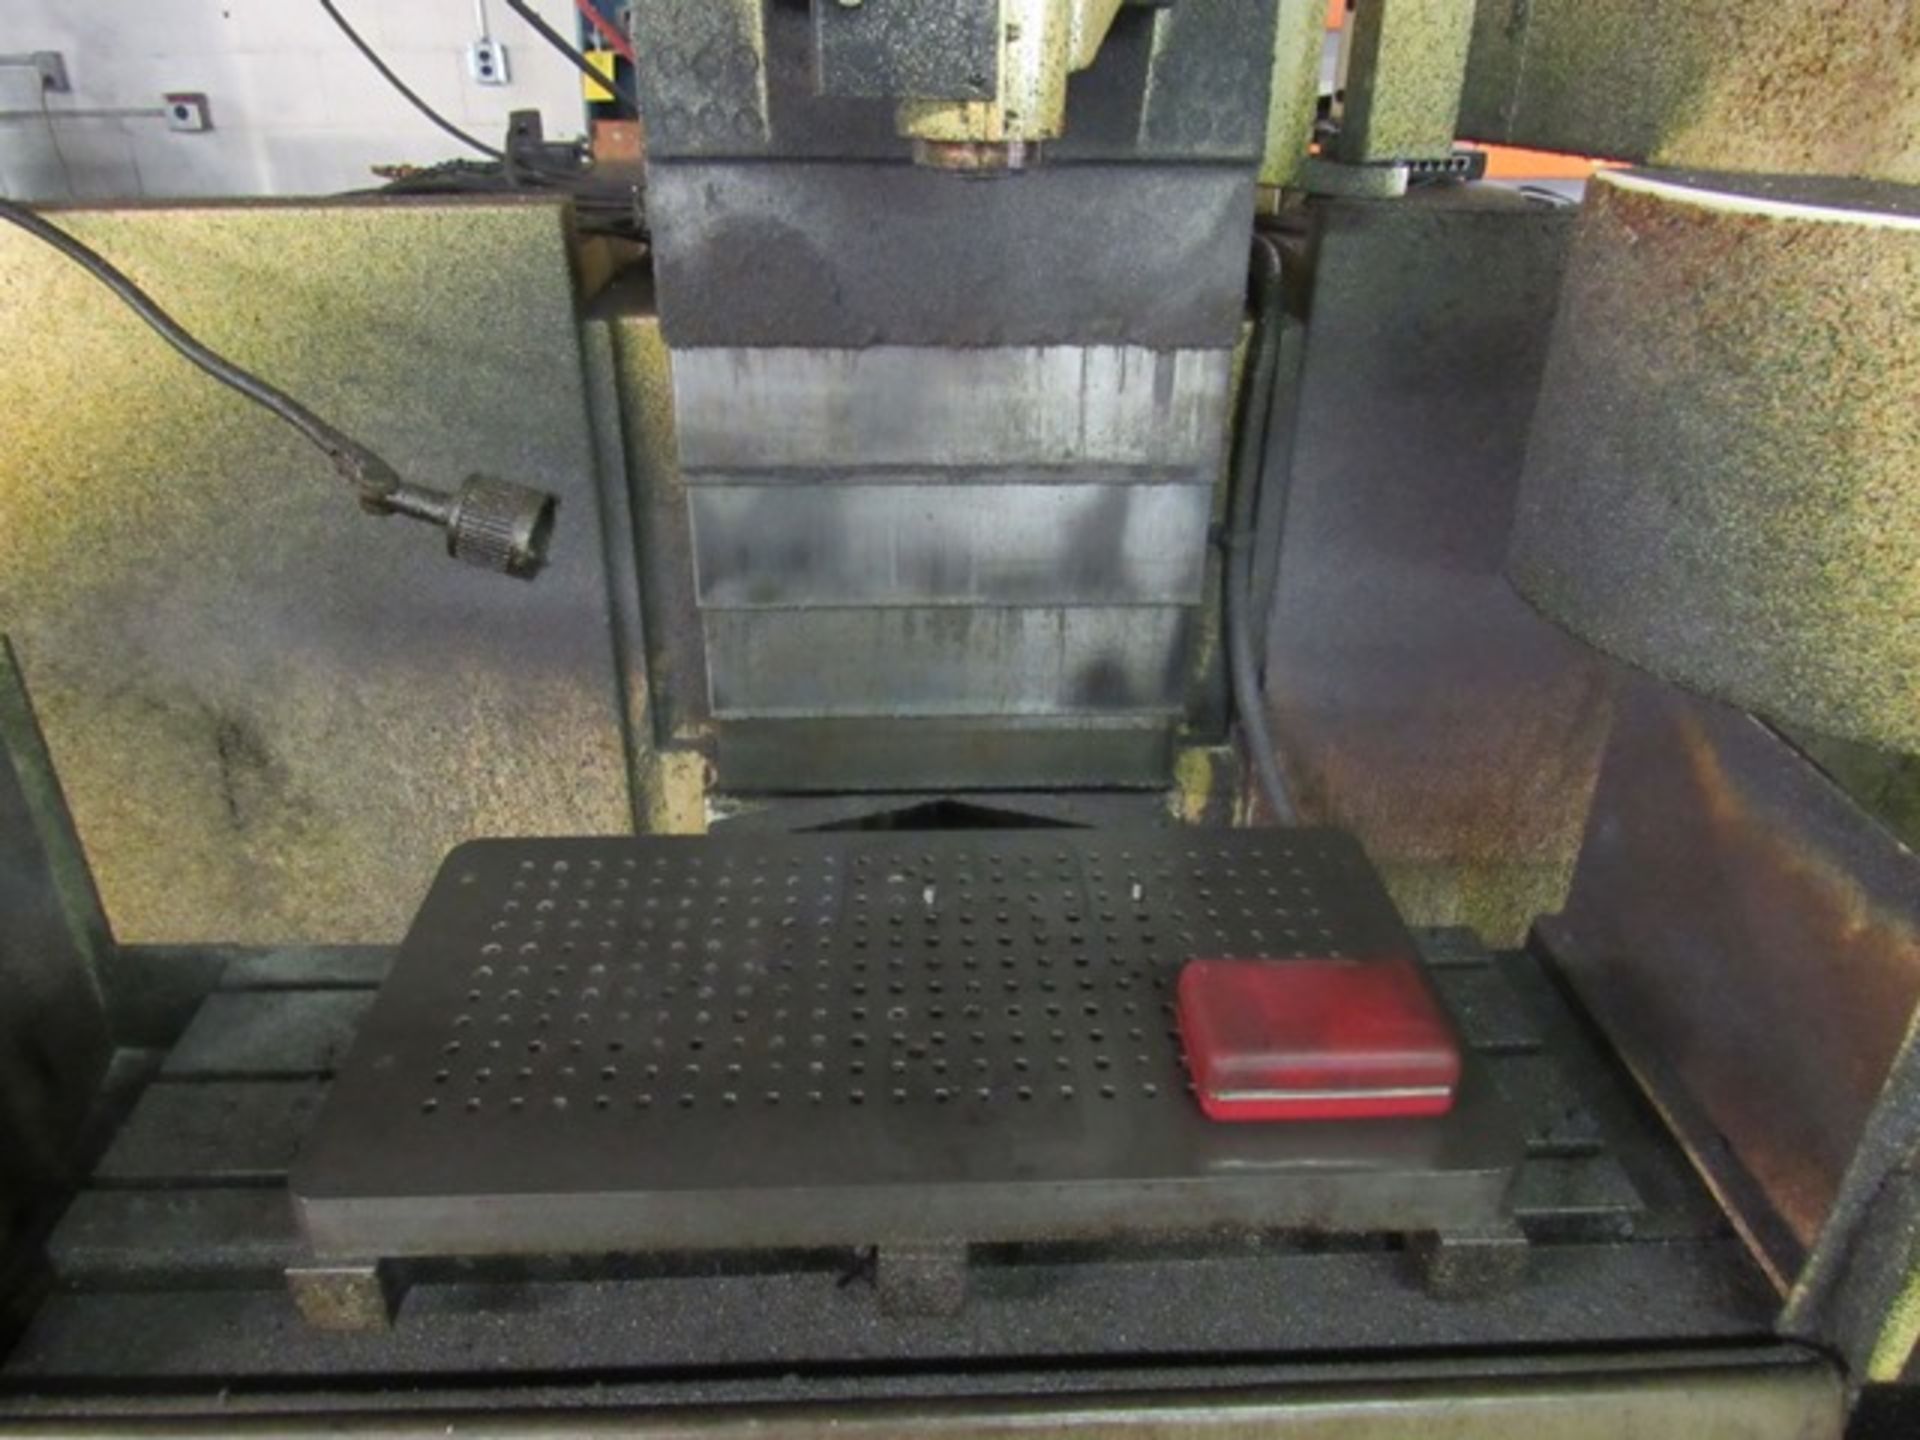 Boston Matic CNC Milling Machine, Model #BD18-1, S/N #18-224, Volts 440, Phase 3, Rigging Fee: $1300 - Image 5 of 11